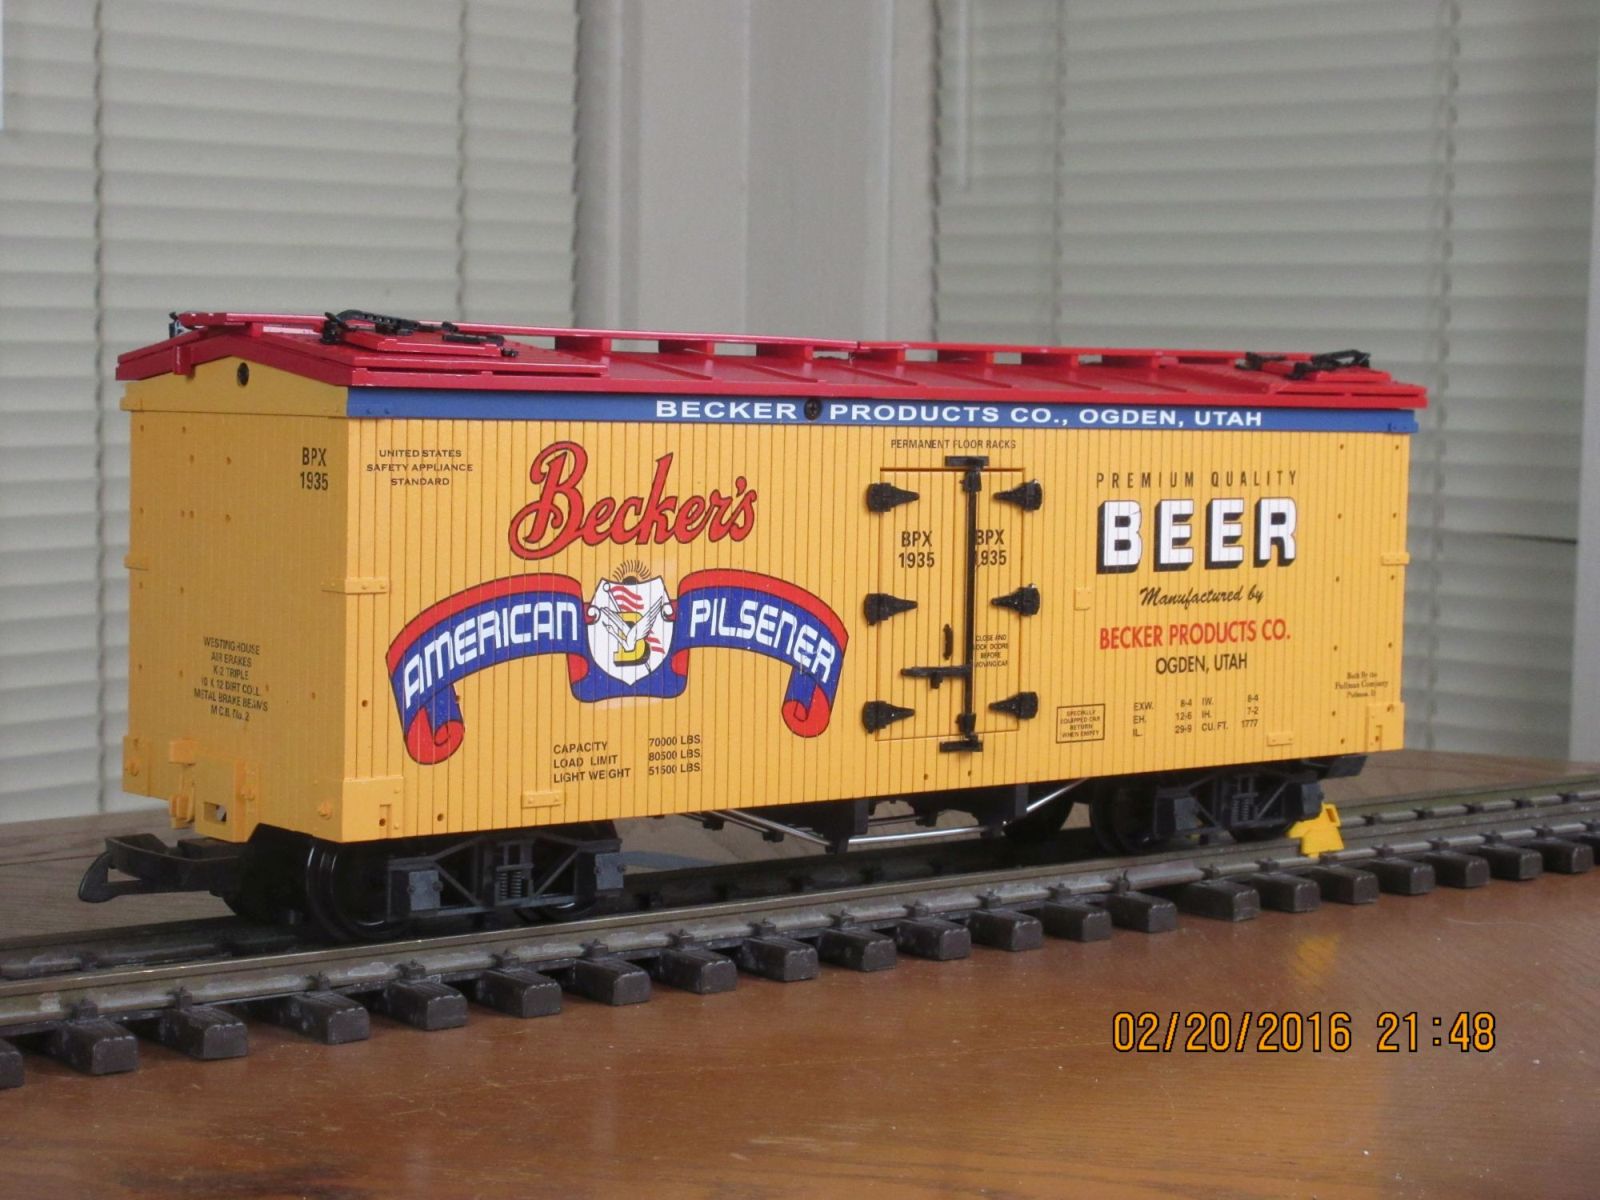 R16495A Beckers Beer BPX 1935